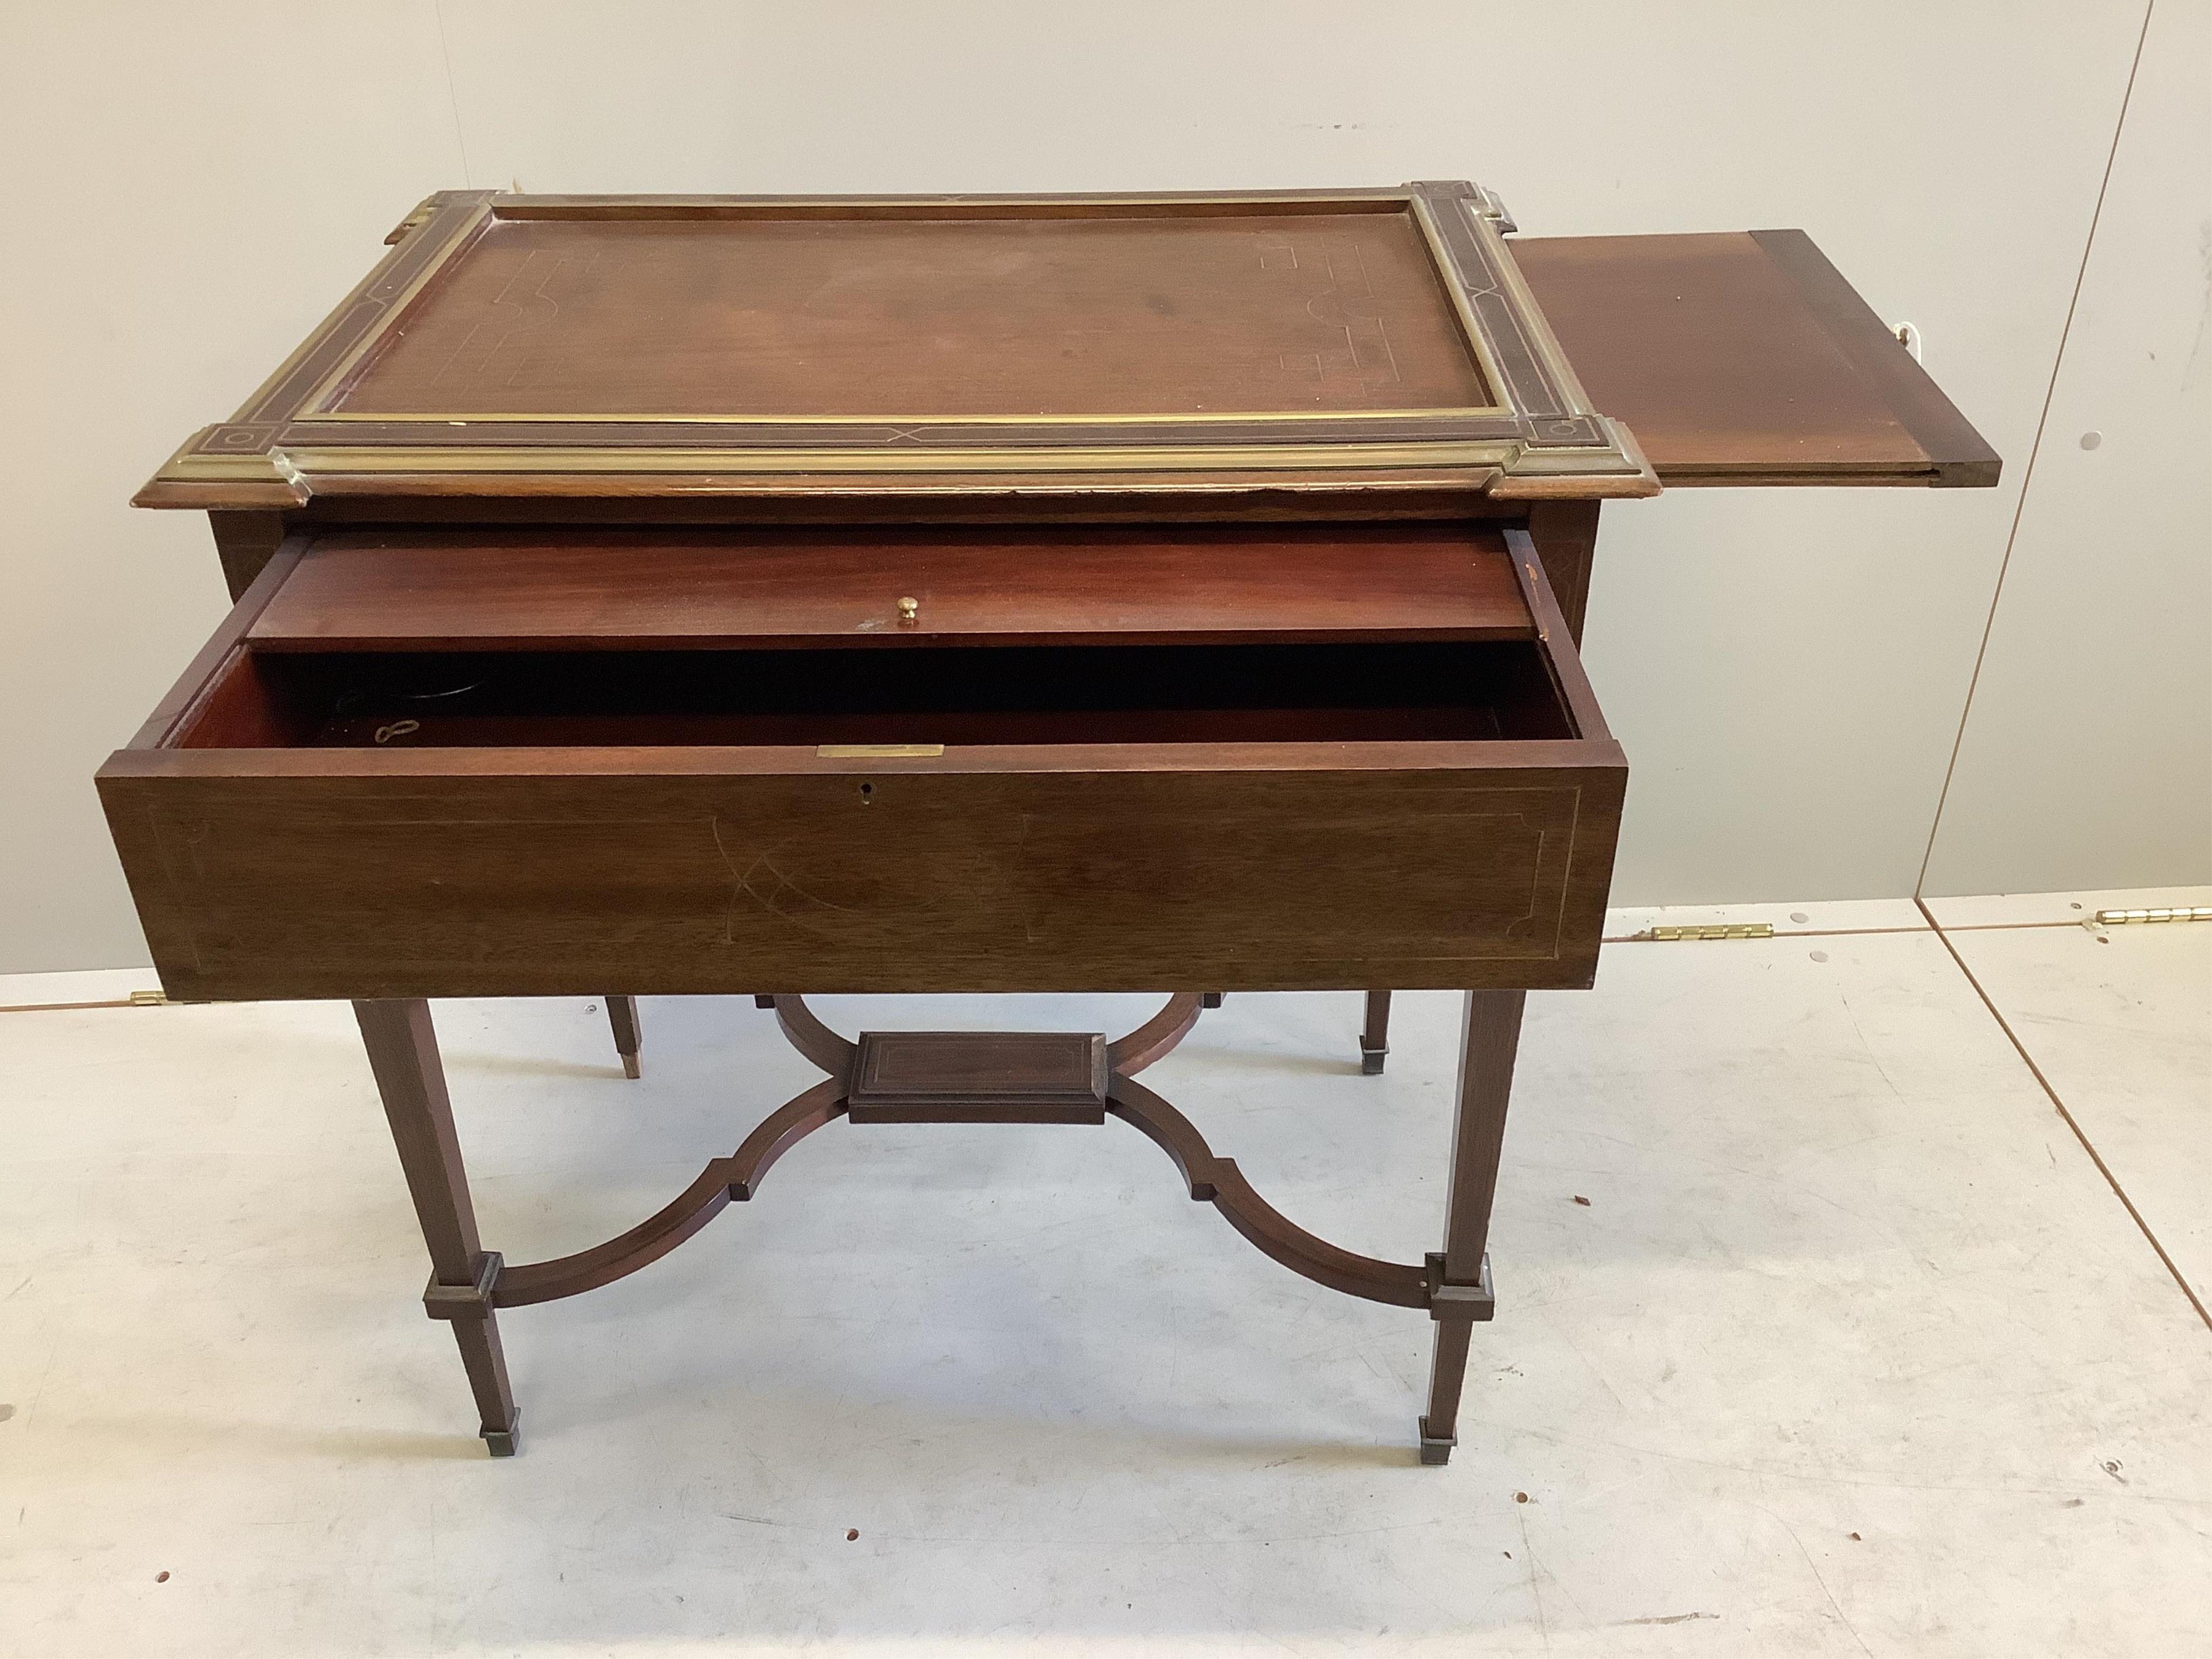 A 19th century French Empire mahogany writing table with gilt brass inlay, frieze drawer with fitted interior and twin pull-out candle slides, on square tapered legs and cross stretchers, width 71cm, depth 47cm, height 7